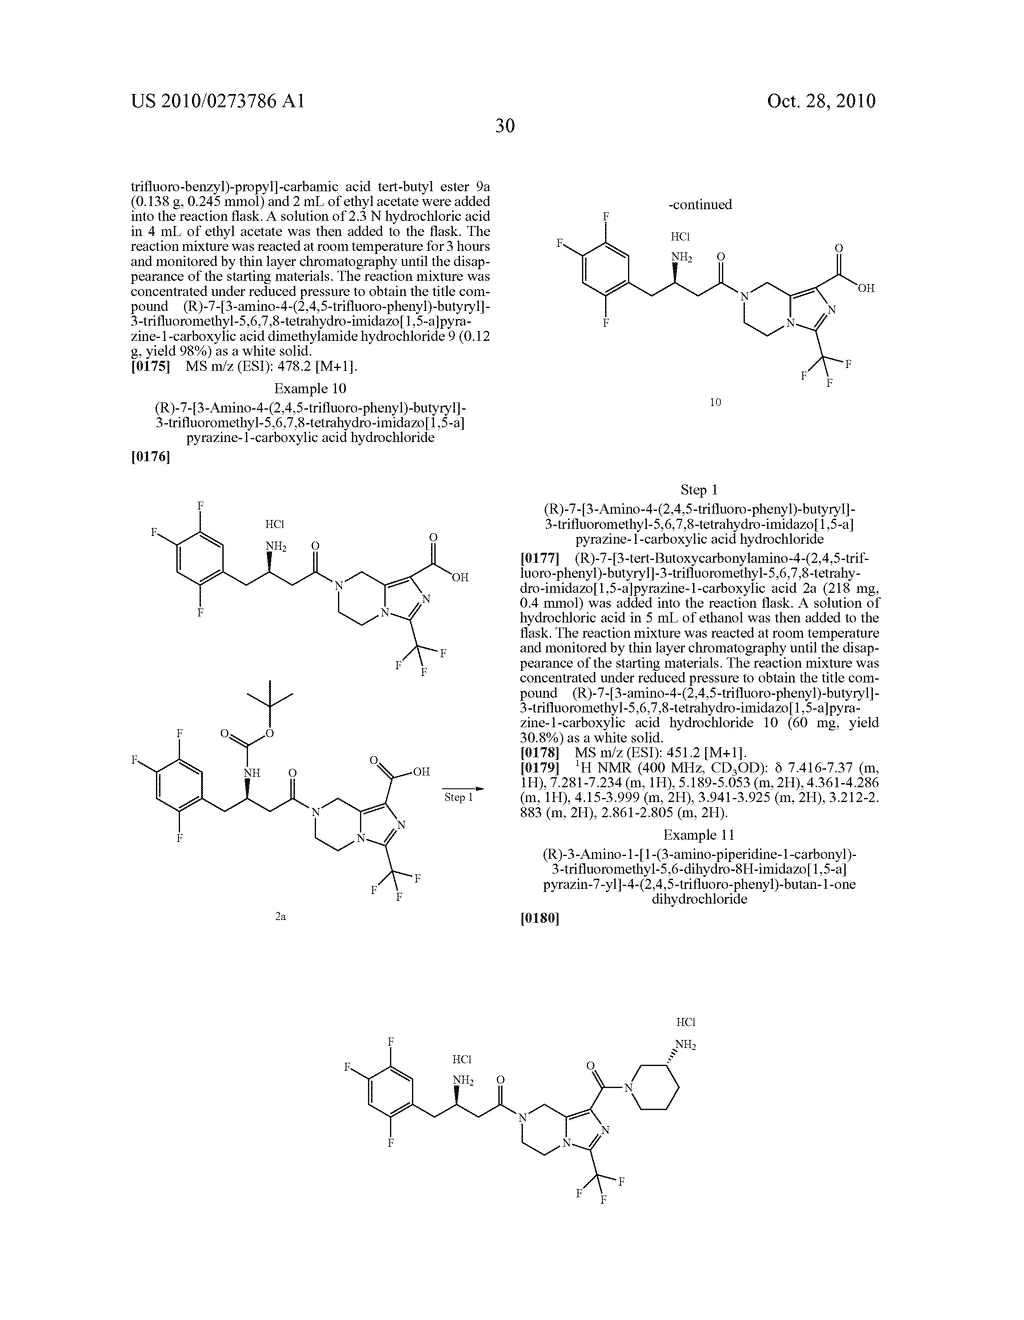 TETRAHYDRO-IMIDAZ0[1,5-A]PYRAZINE DERIVATIVES, PREPARATION PROCESS AND MEDICINAL USE THEREOF - diagram, schematic, and image 31